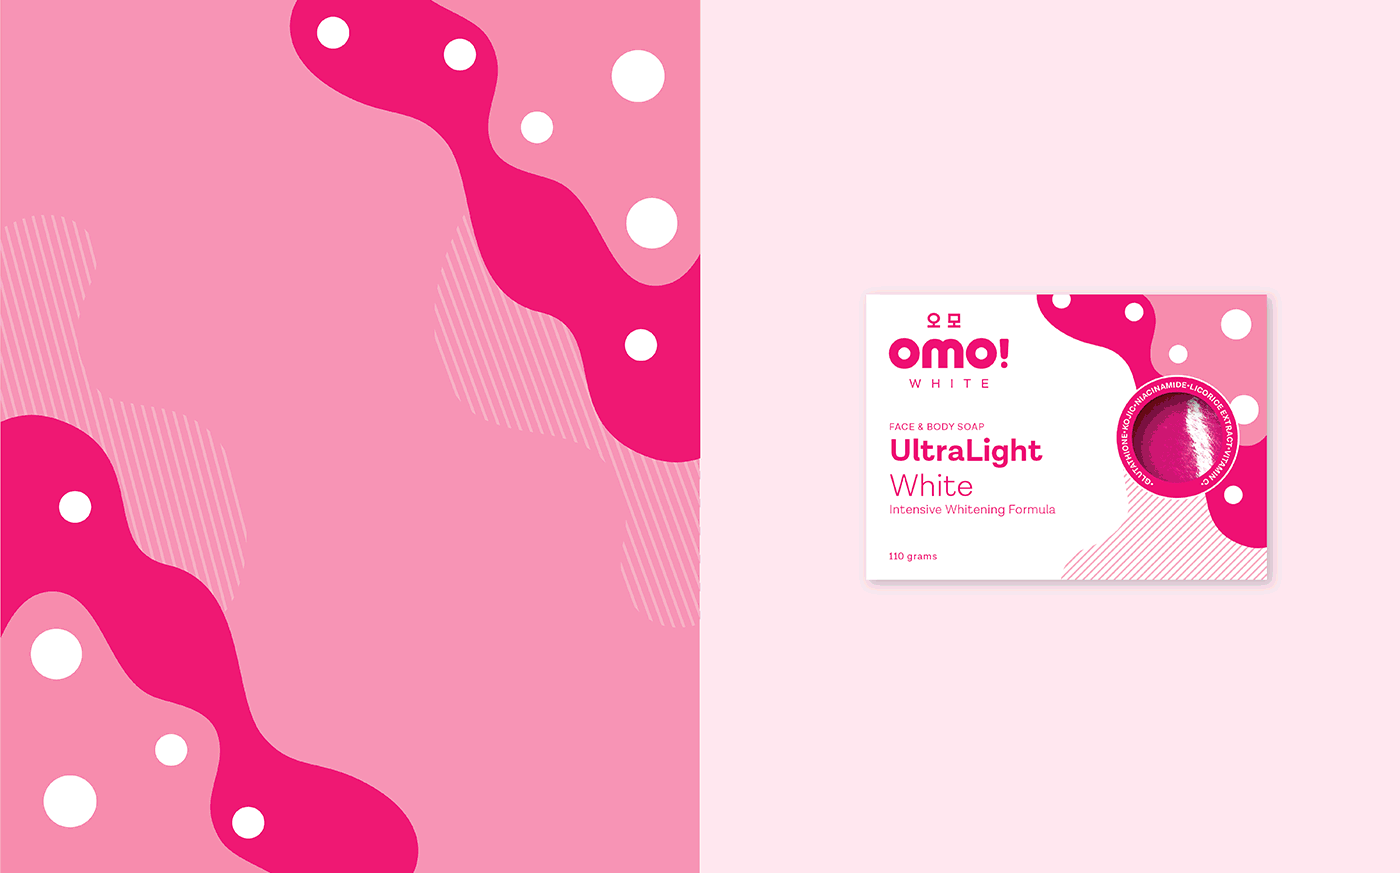 Cute wavy brand pattern and soap packaging design for beauty and skincare brand Omo! White